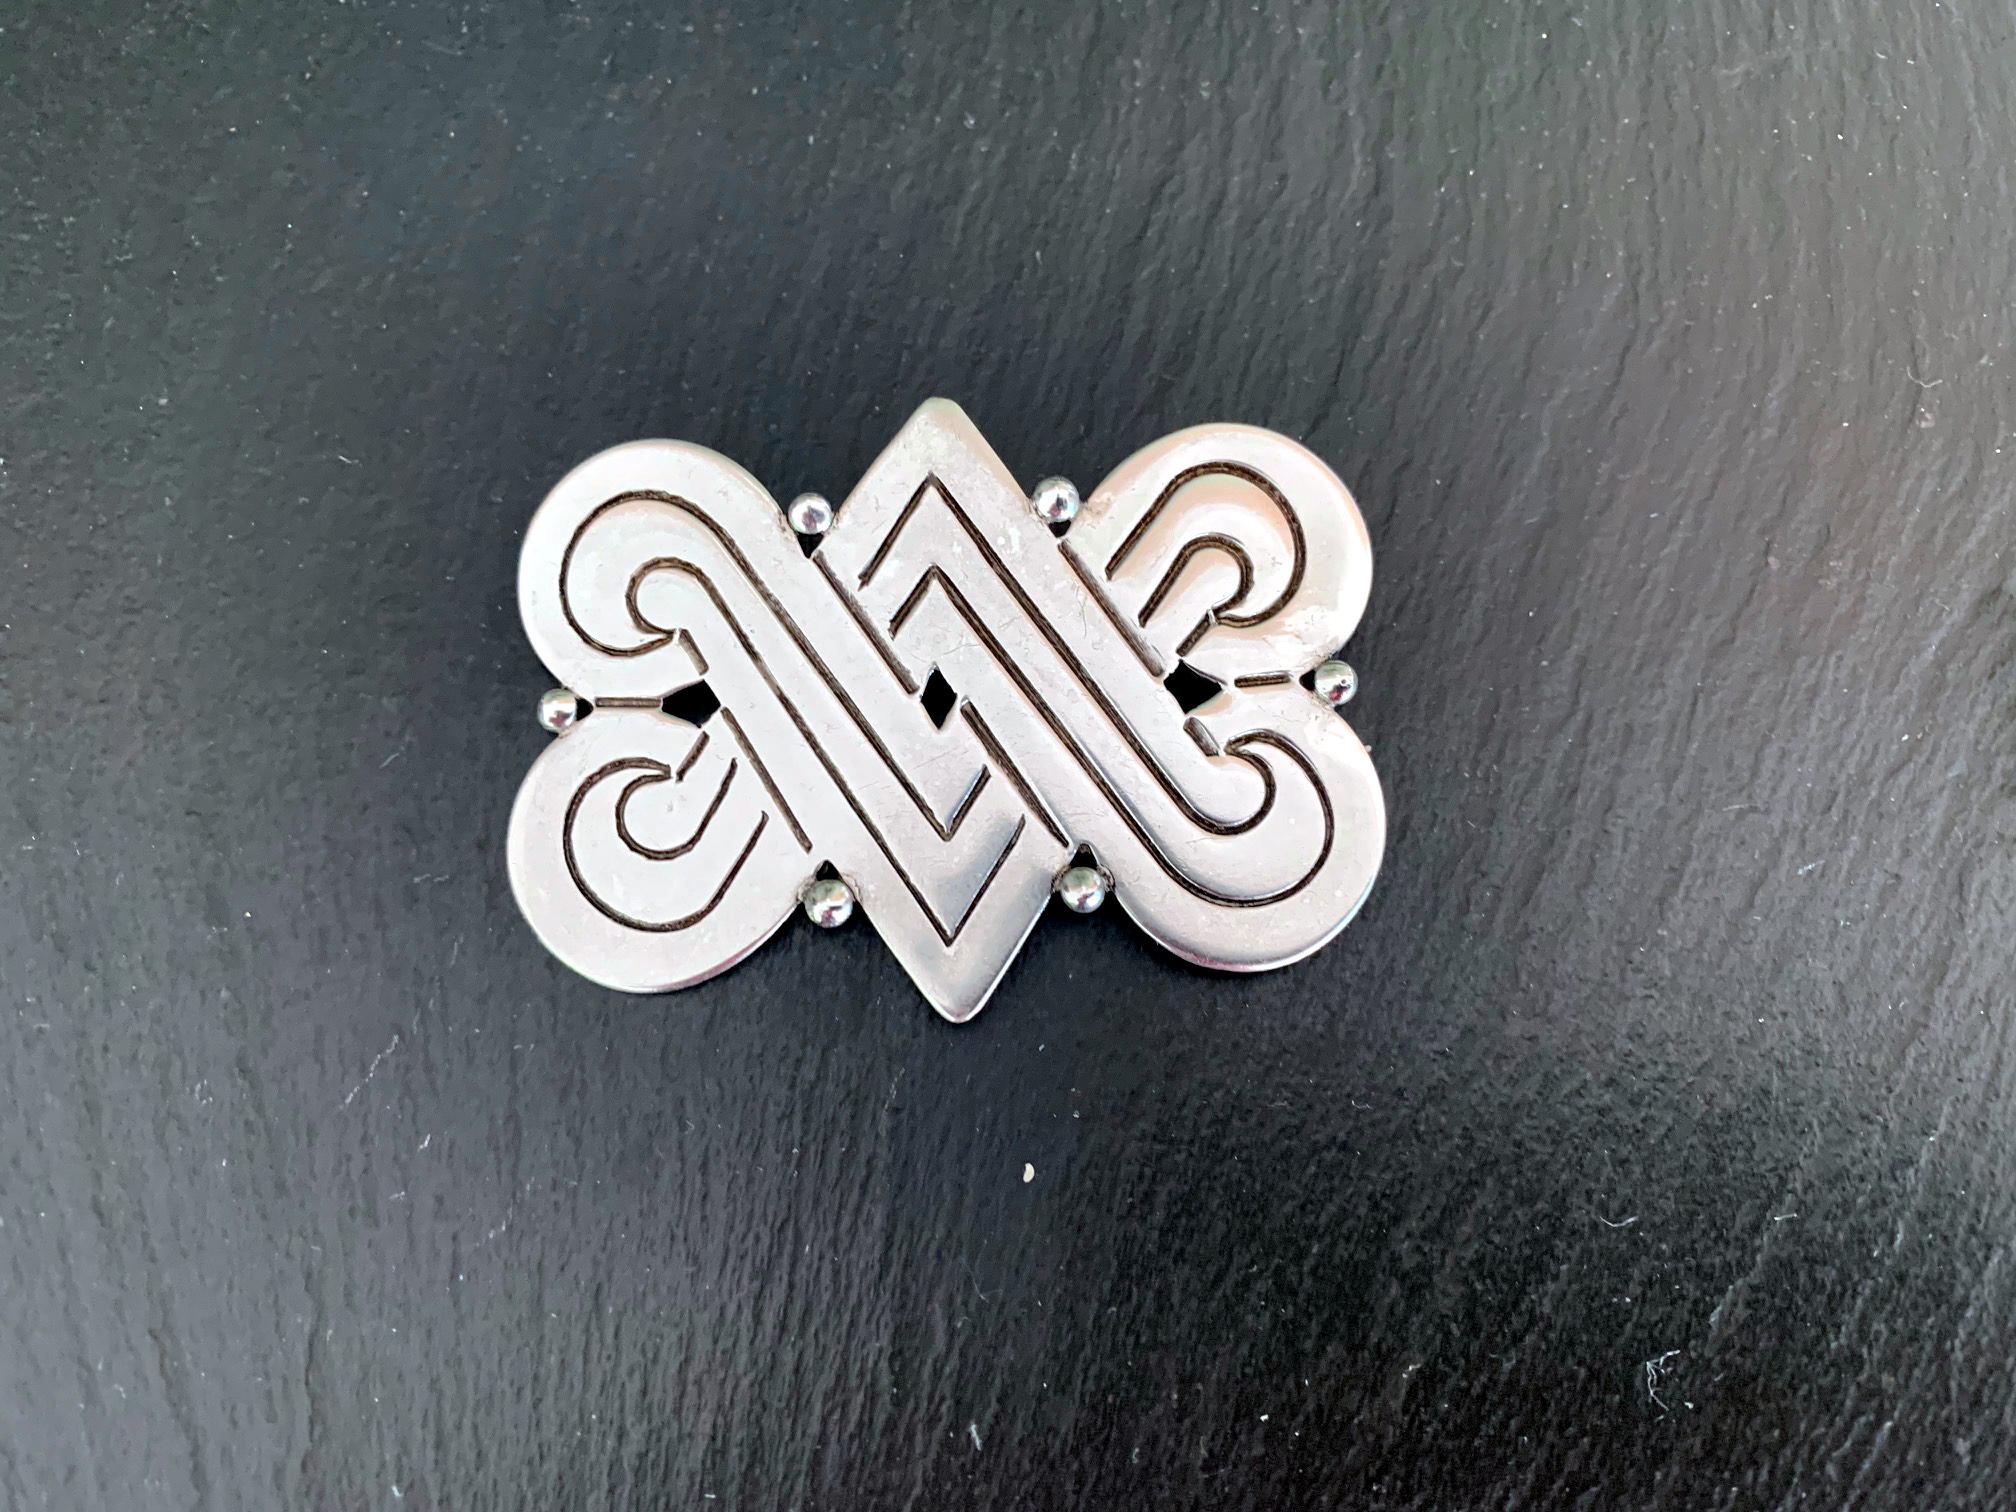 A vintage sterling silver brooch from the workshop of Hector Aguilar (1905-1986) in Taxco, Mexico, circa 1940s. The double V design featured on this brooch was inspired by indigenous Mexican symbolism for fertility. Hallmarked on the back as